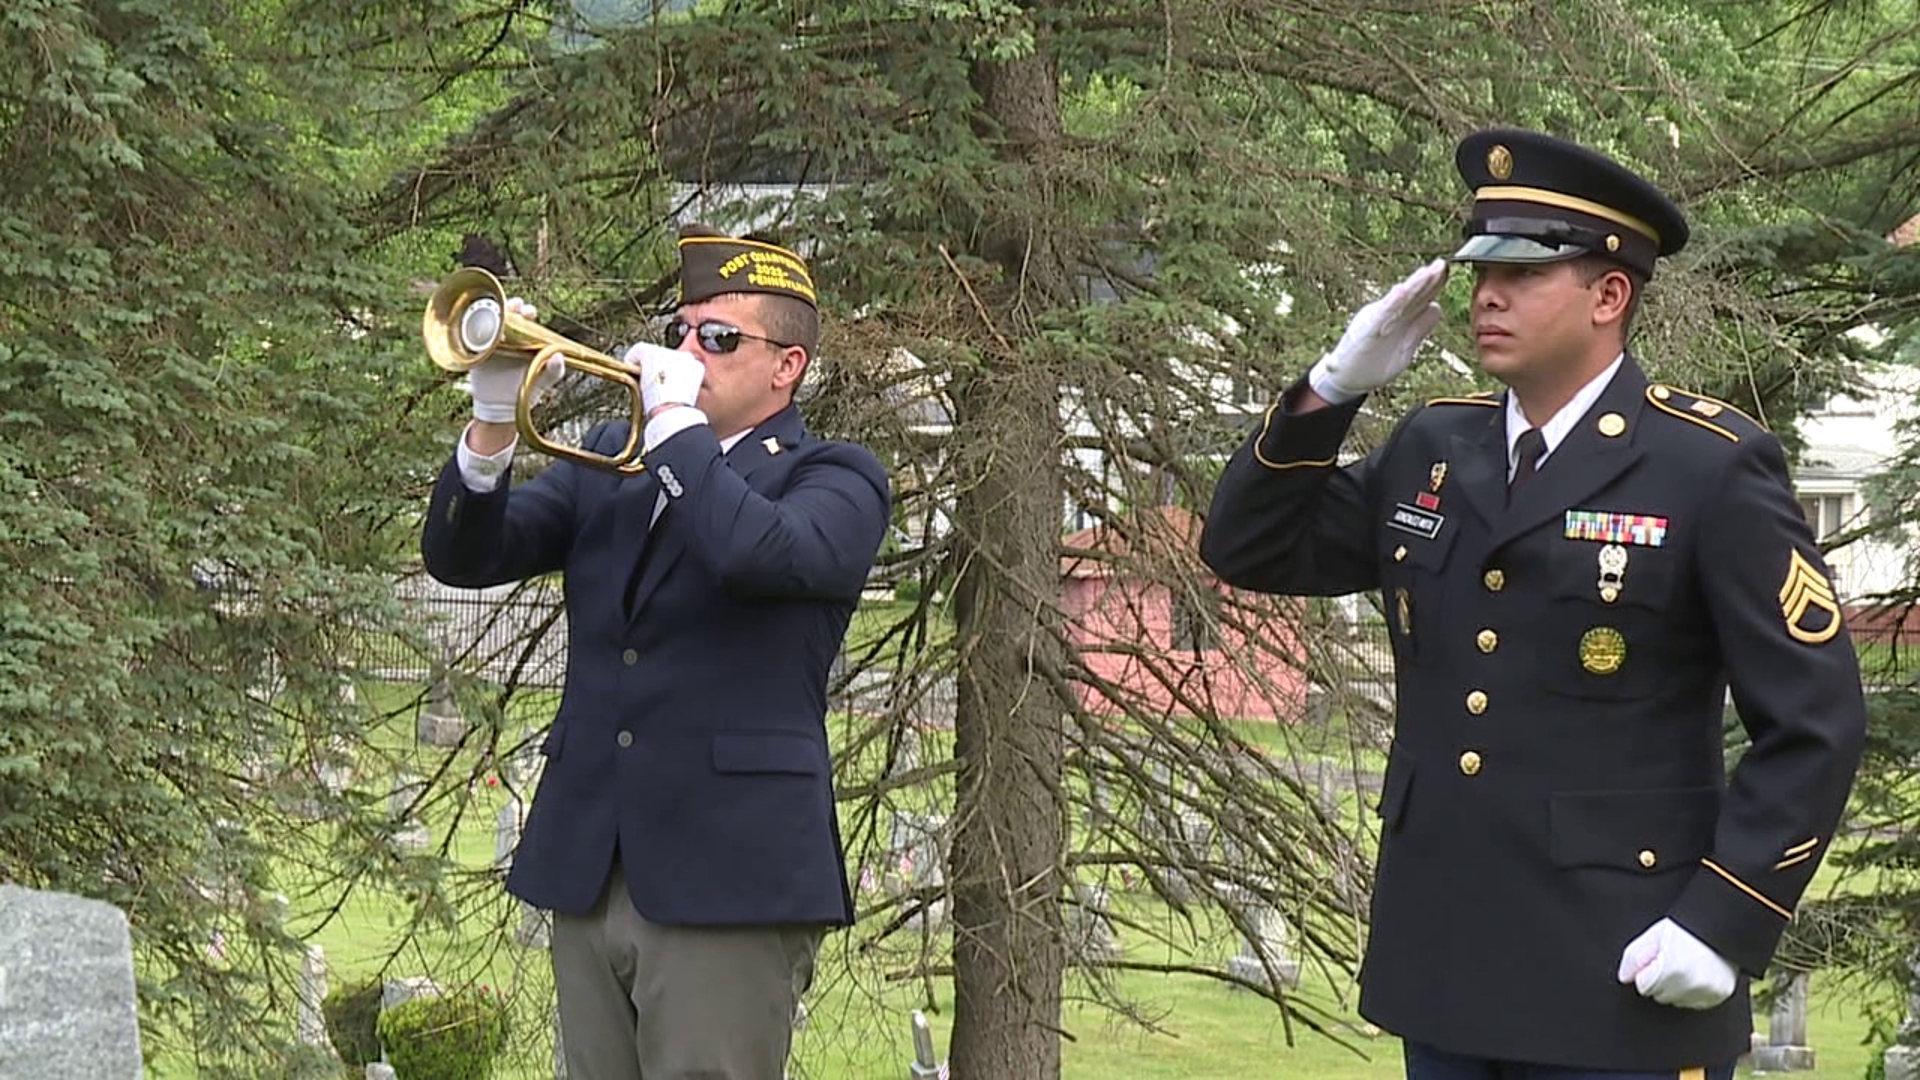 People across Lackawanna County observed Memorial Day through parades and special ceremonies.